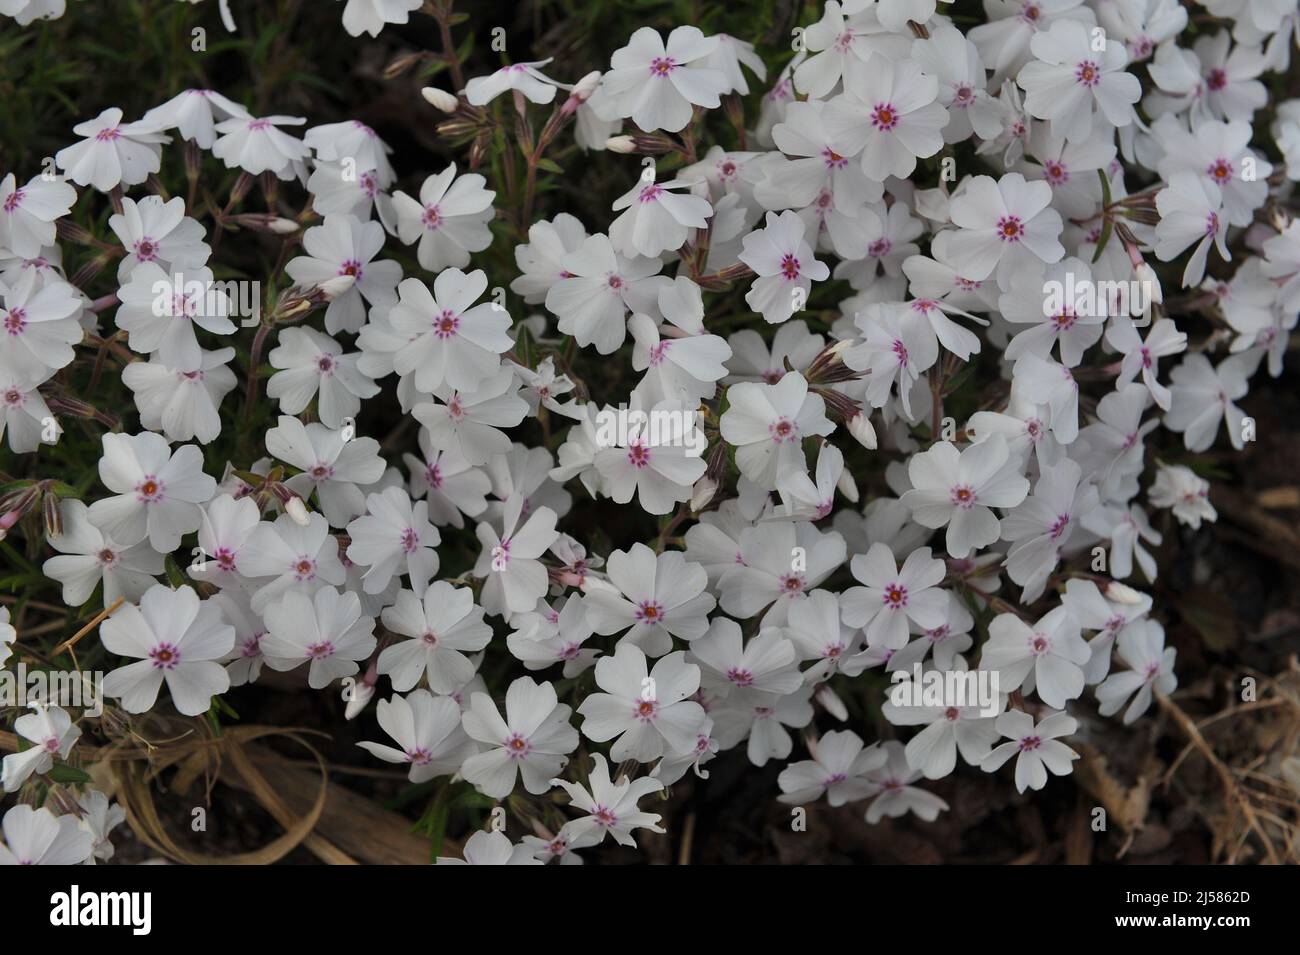 White with a pink eye moss phlox (Phlox subulata) Amazing Grace bloom in a garden in May Stock Photo